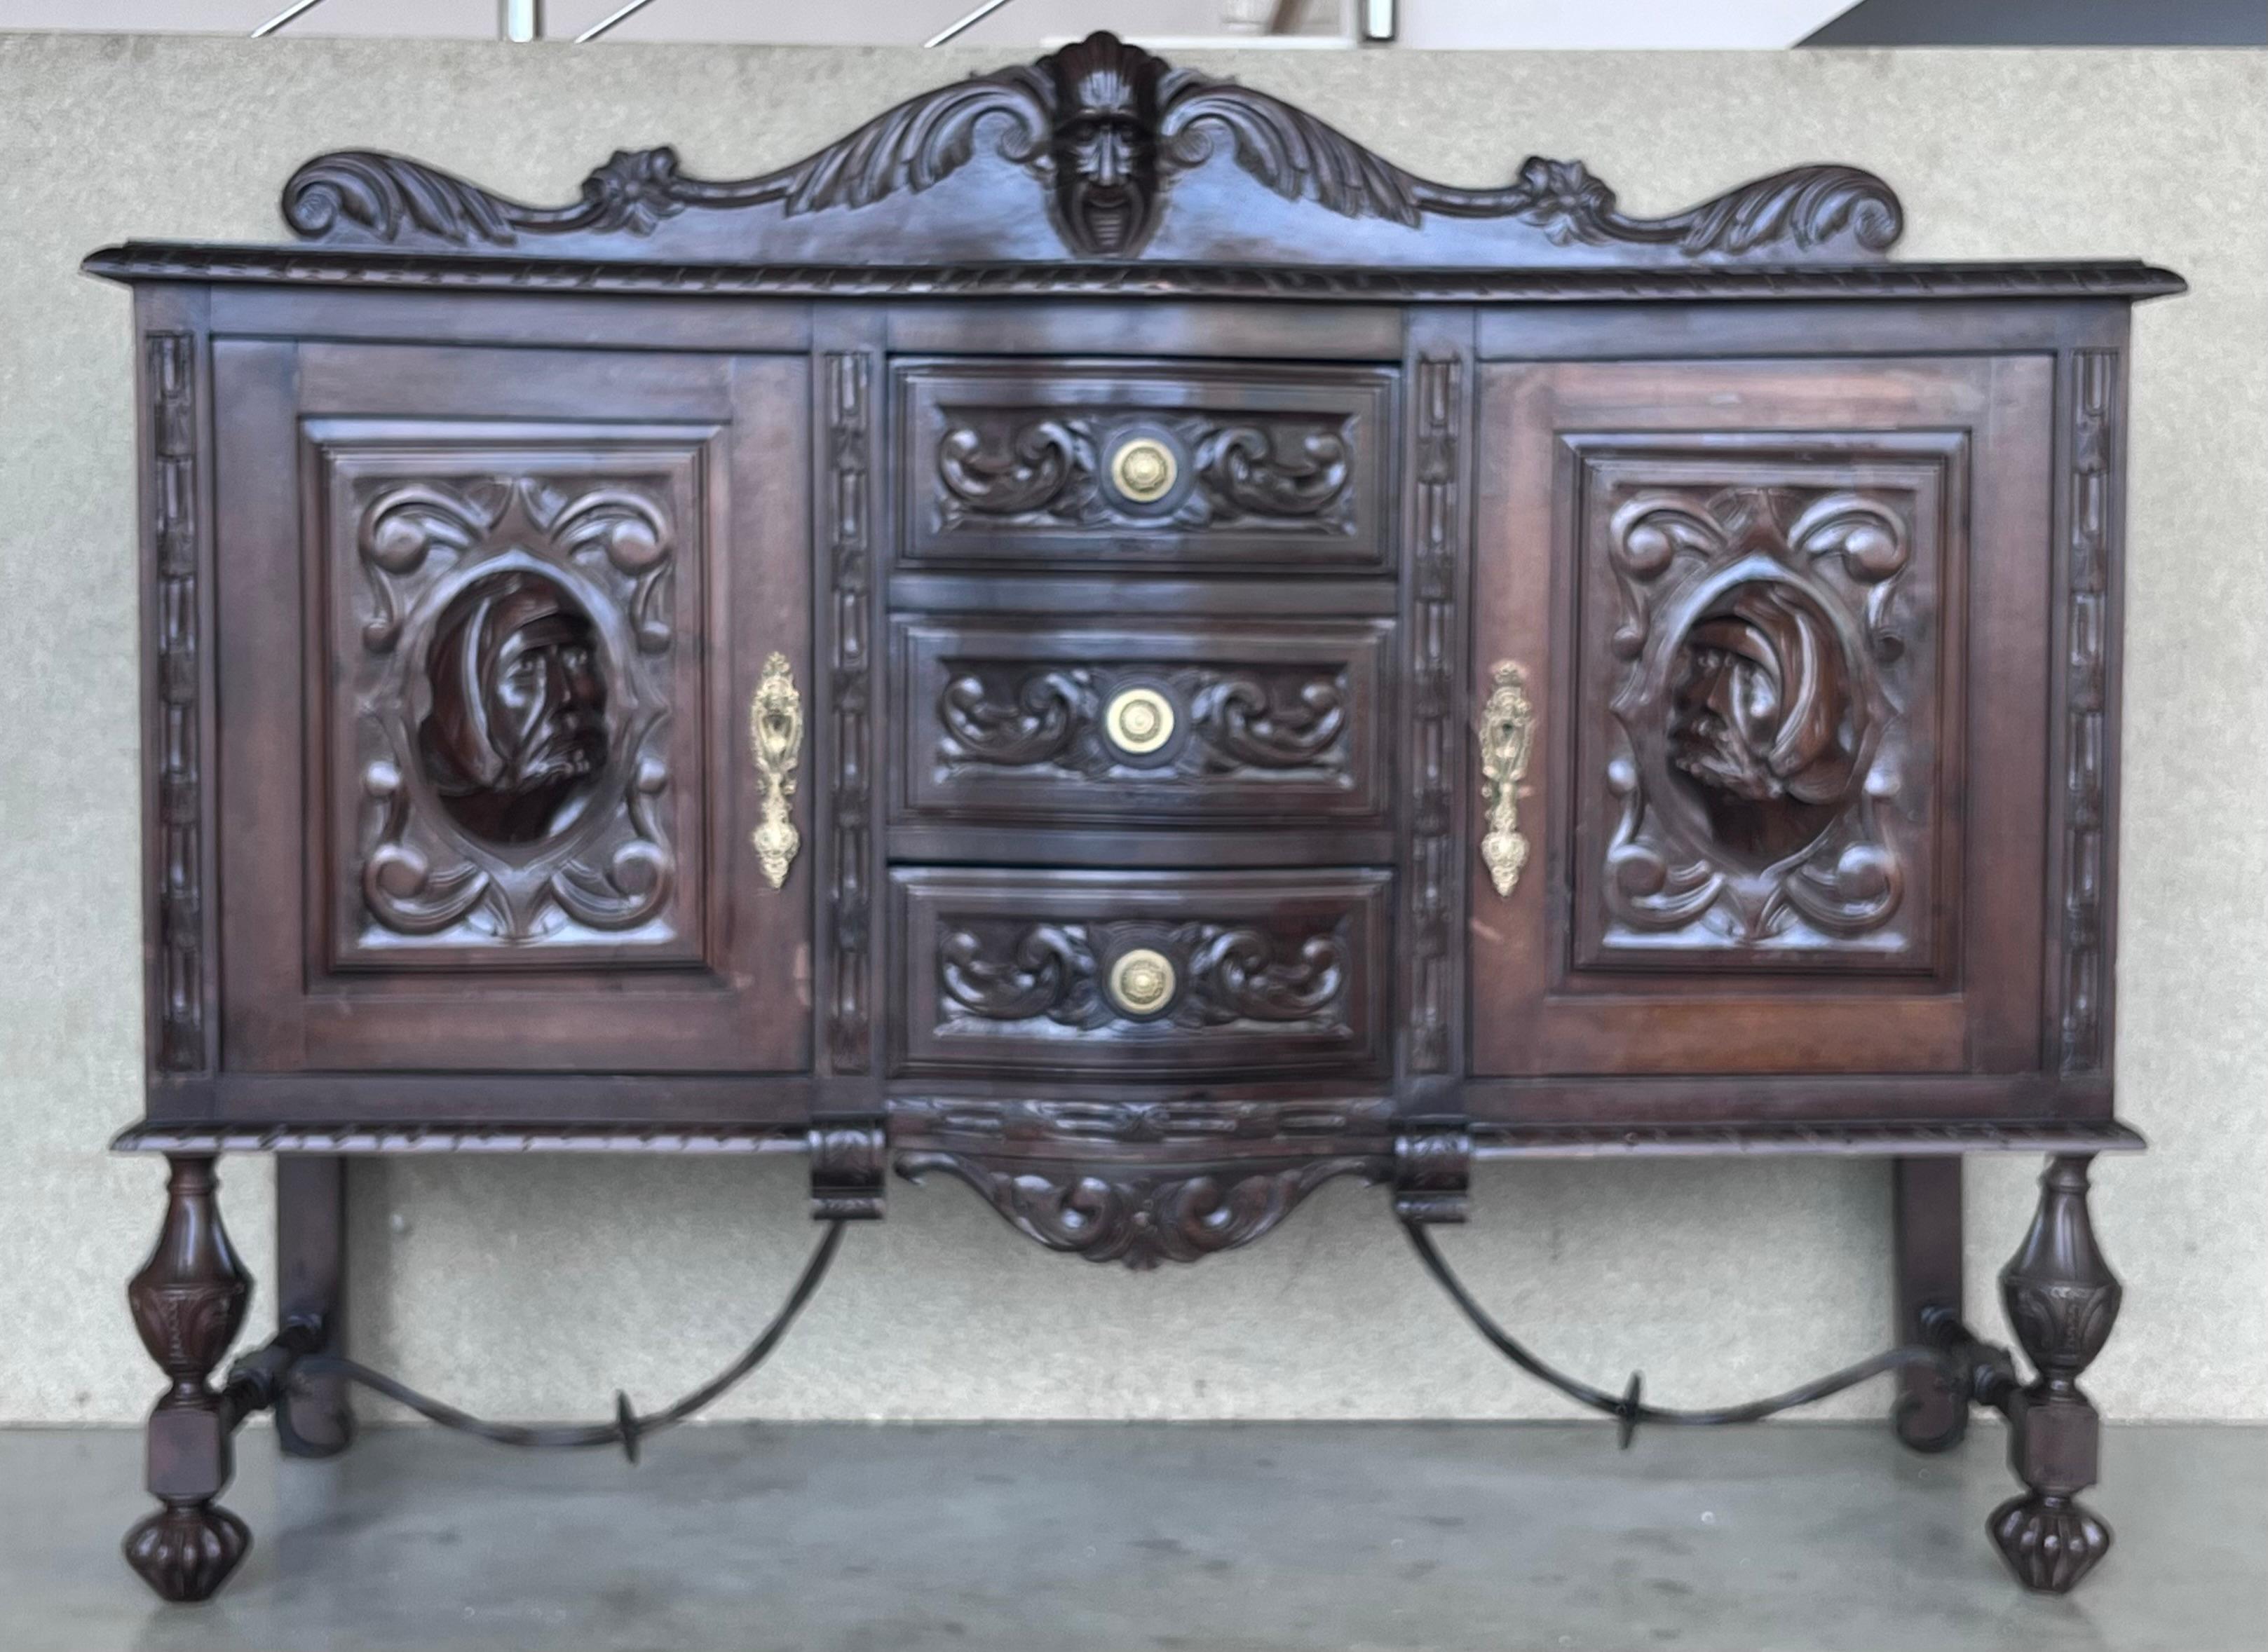 19th century Spanish Renaissance buffet was sculpted from dense, old-growth oak with glorious full relief depictions. Set upon a brilliantly molded framework, the carved door panels are framed by clockwise and counter-clockwise barley columns, with